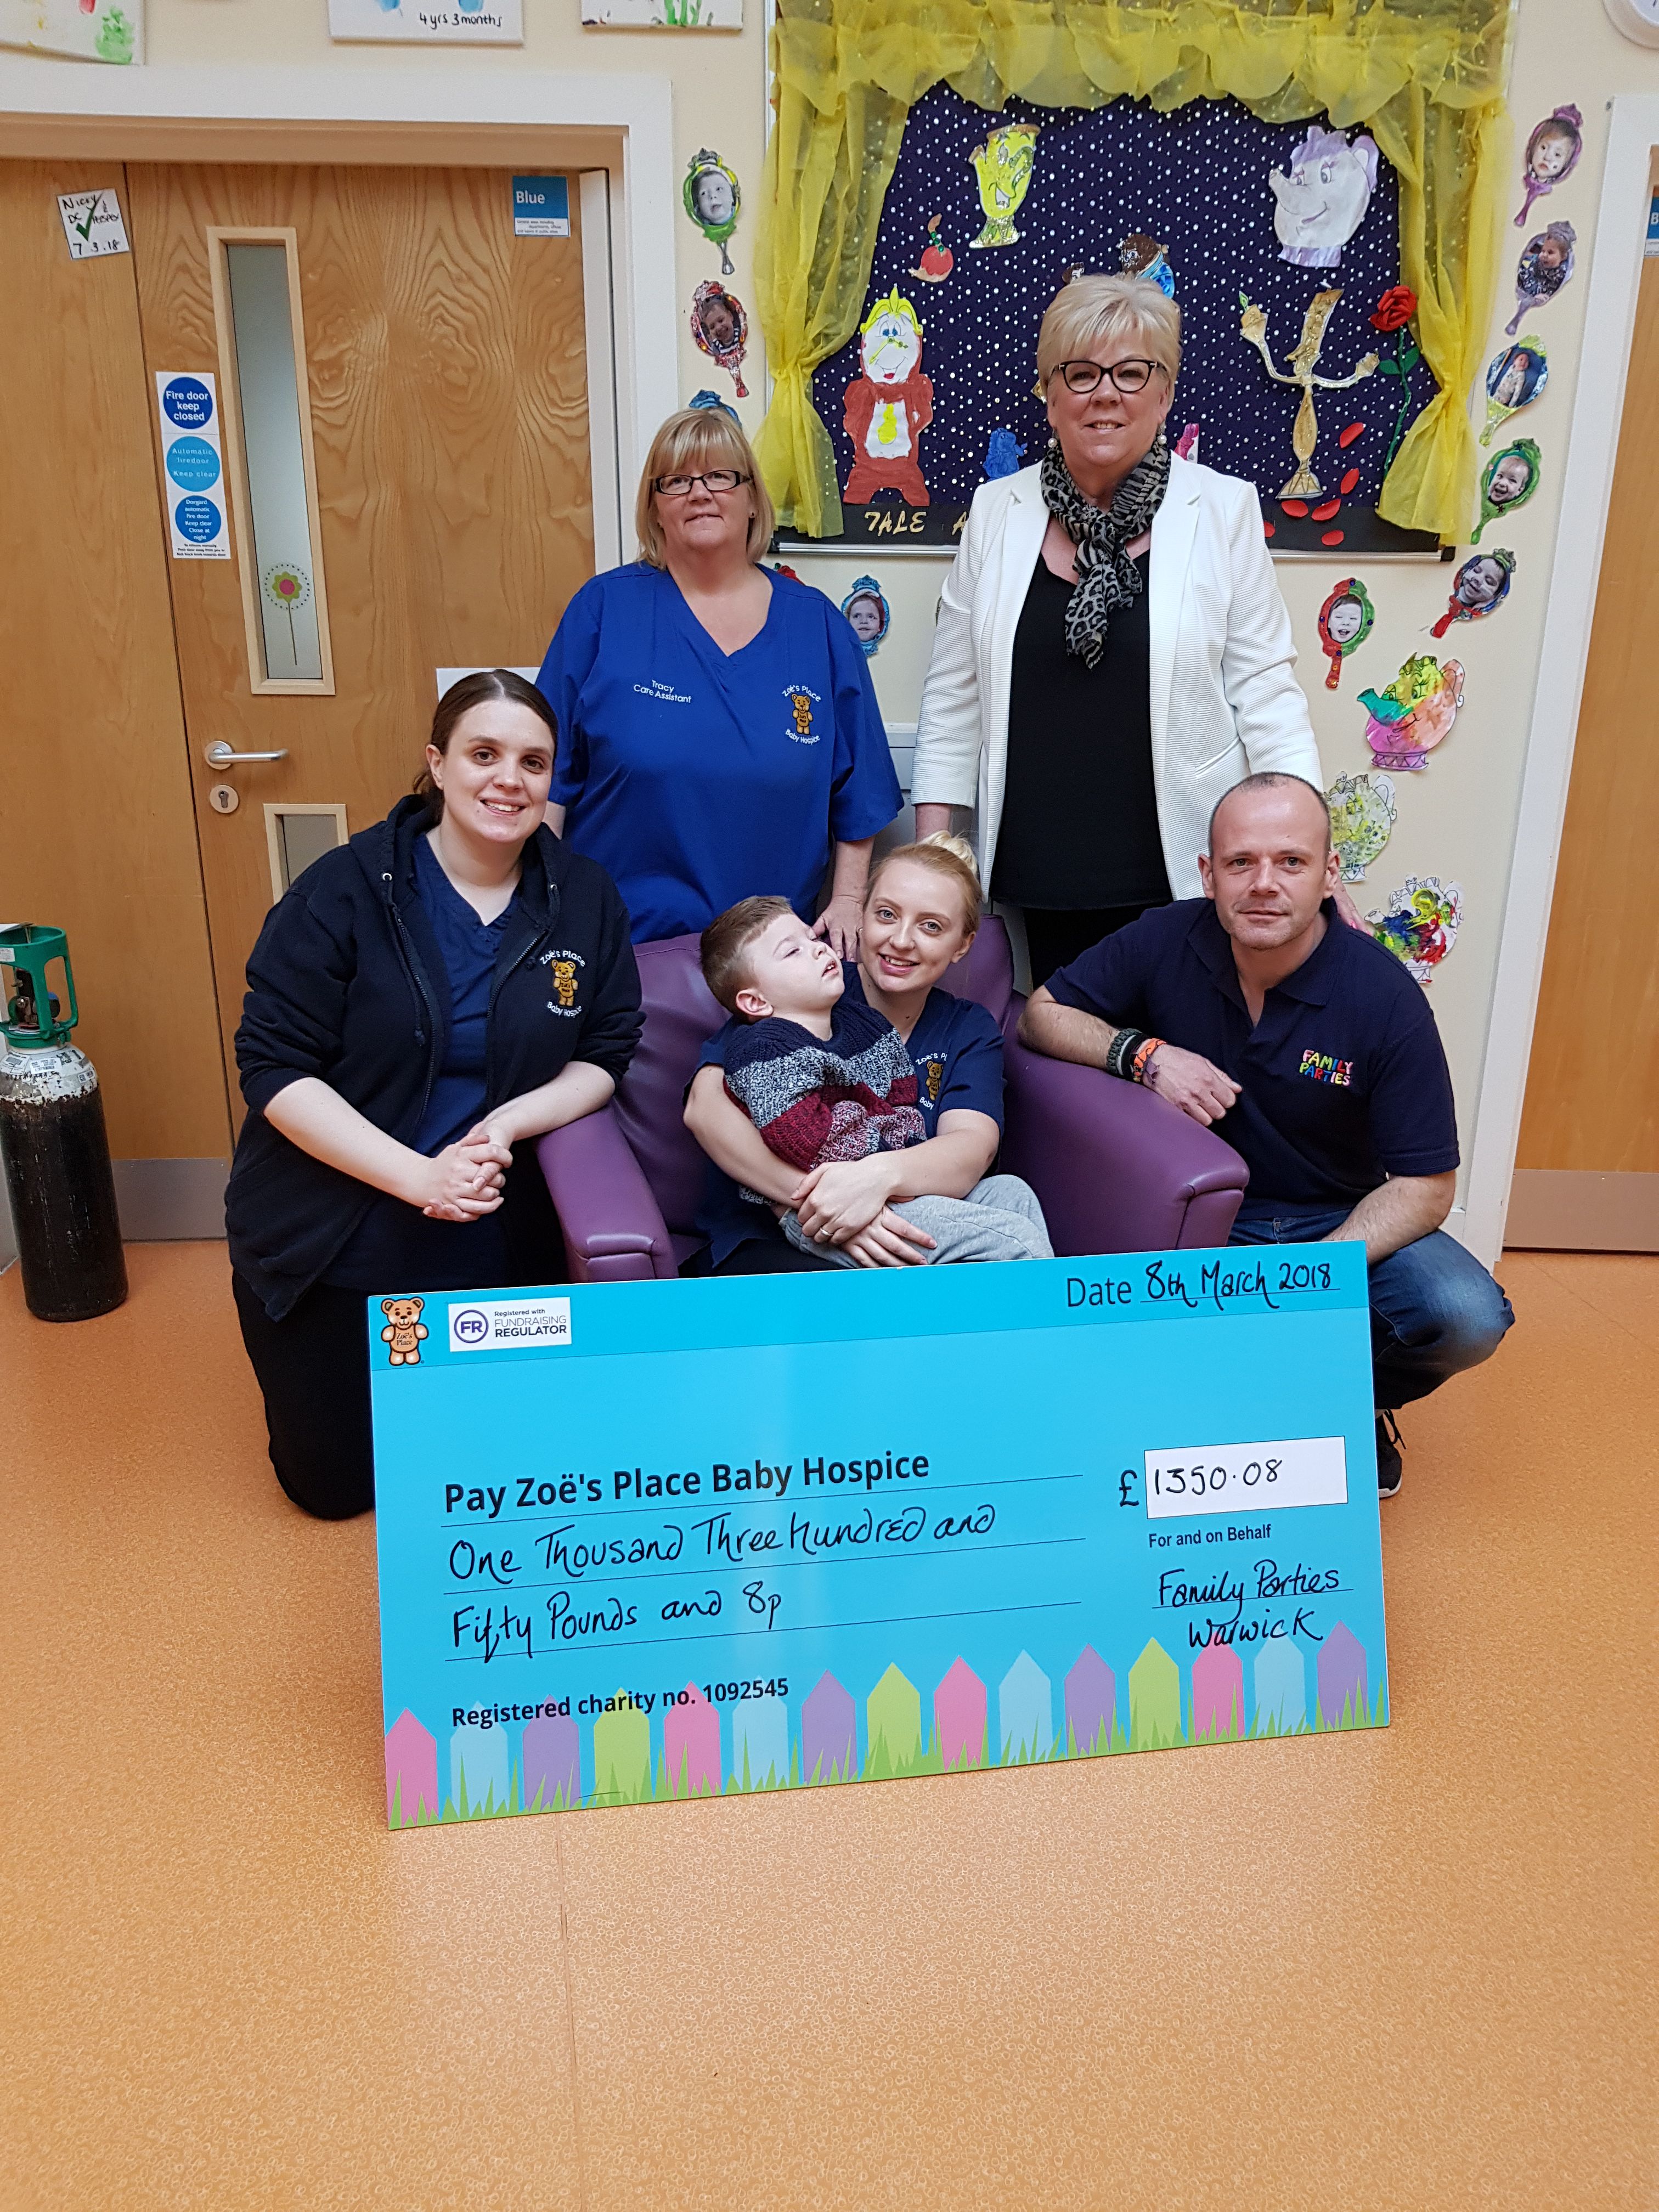 Family Parties cheque presentation to Zoe's Place Baby Hospice in Coventry